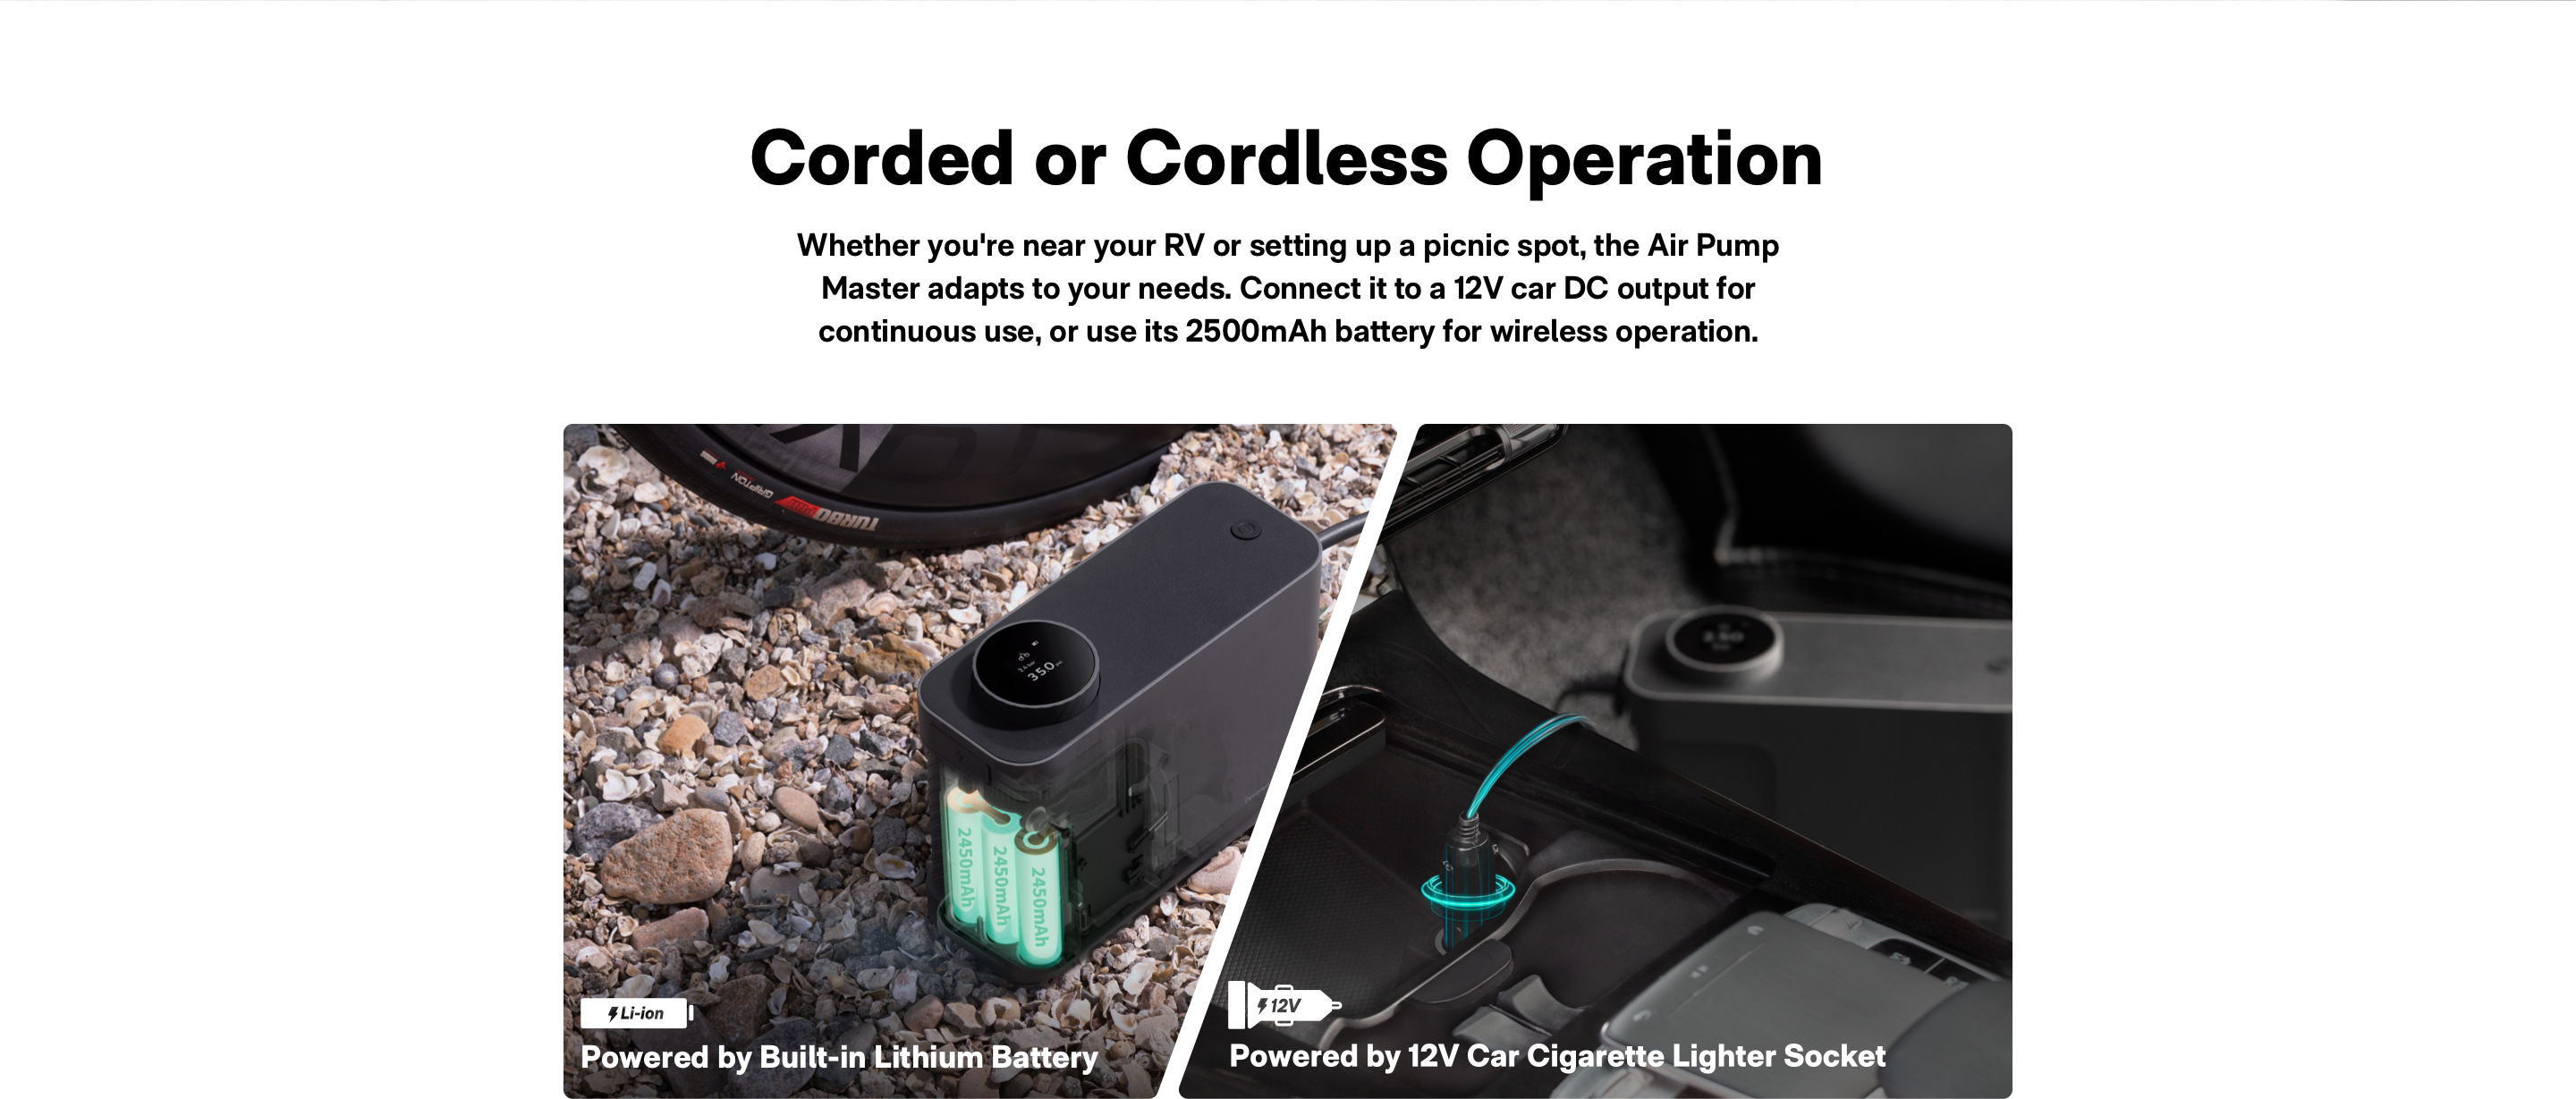 Corded or CordIess Operation: the Air Pump Master adapts to your needs. Connect it to a 12v car DC output for continuous use,  or use its 2500mAh battery for wireless operation.